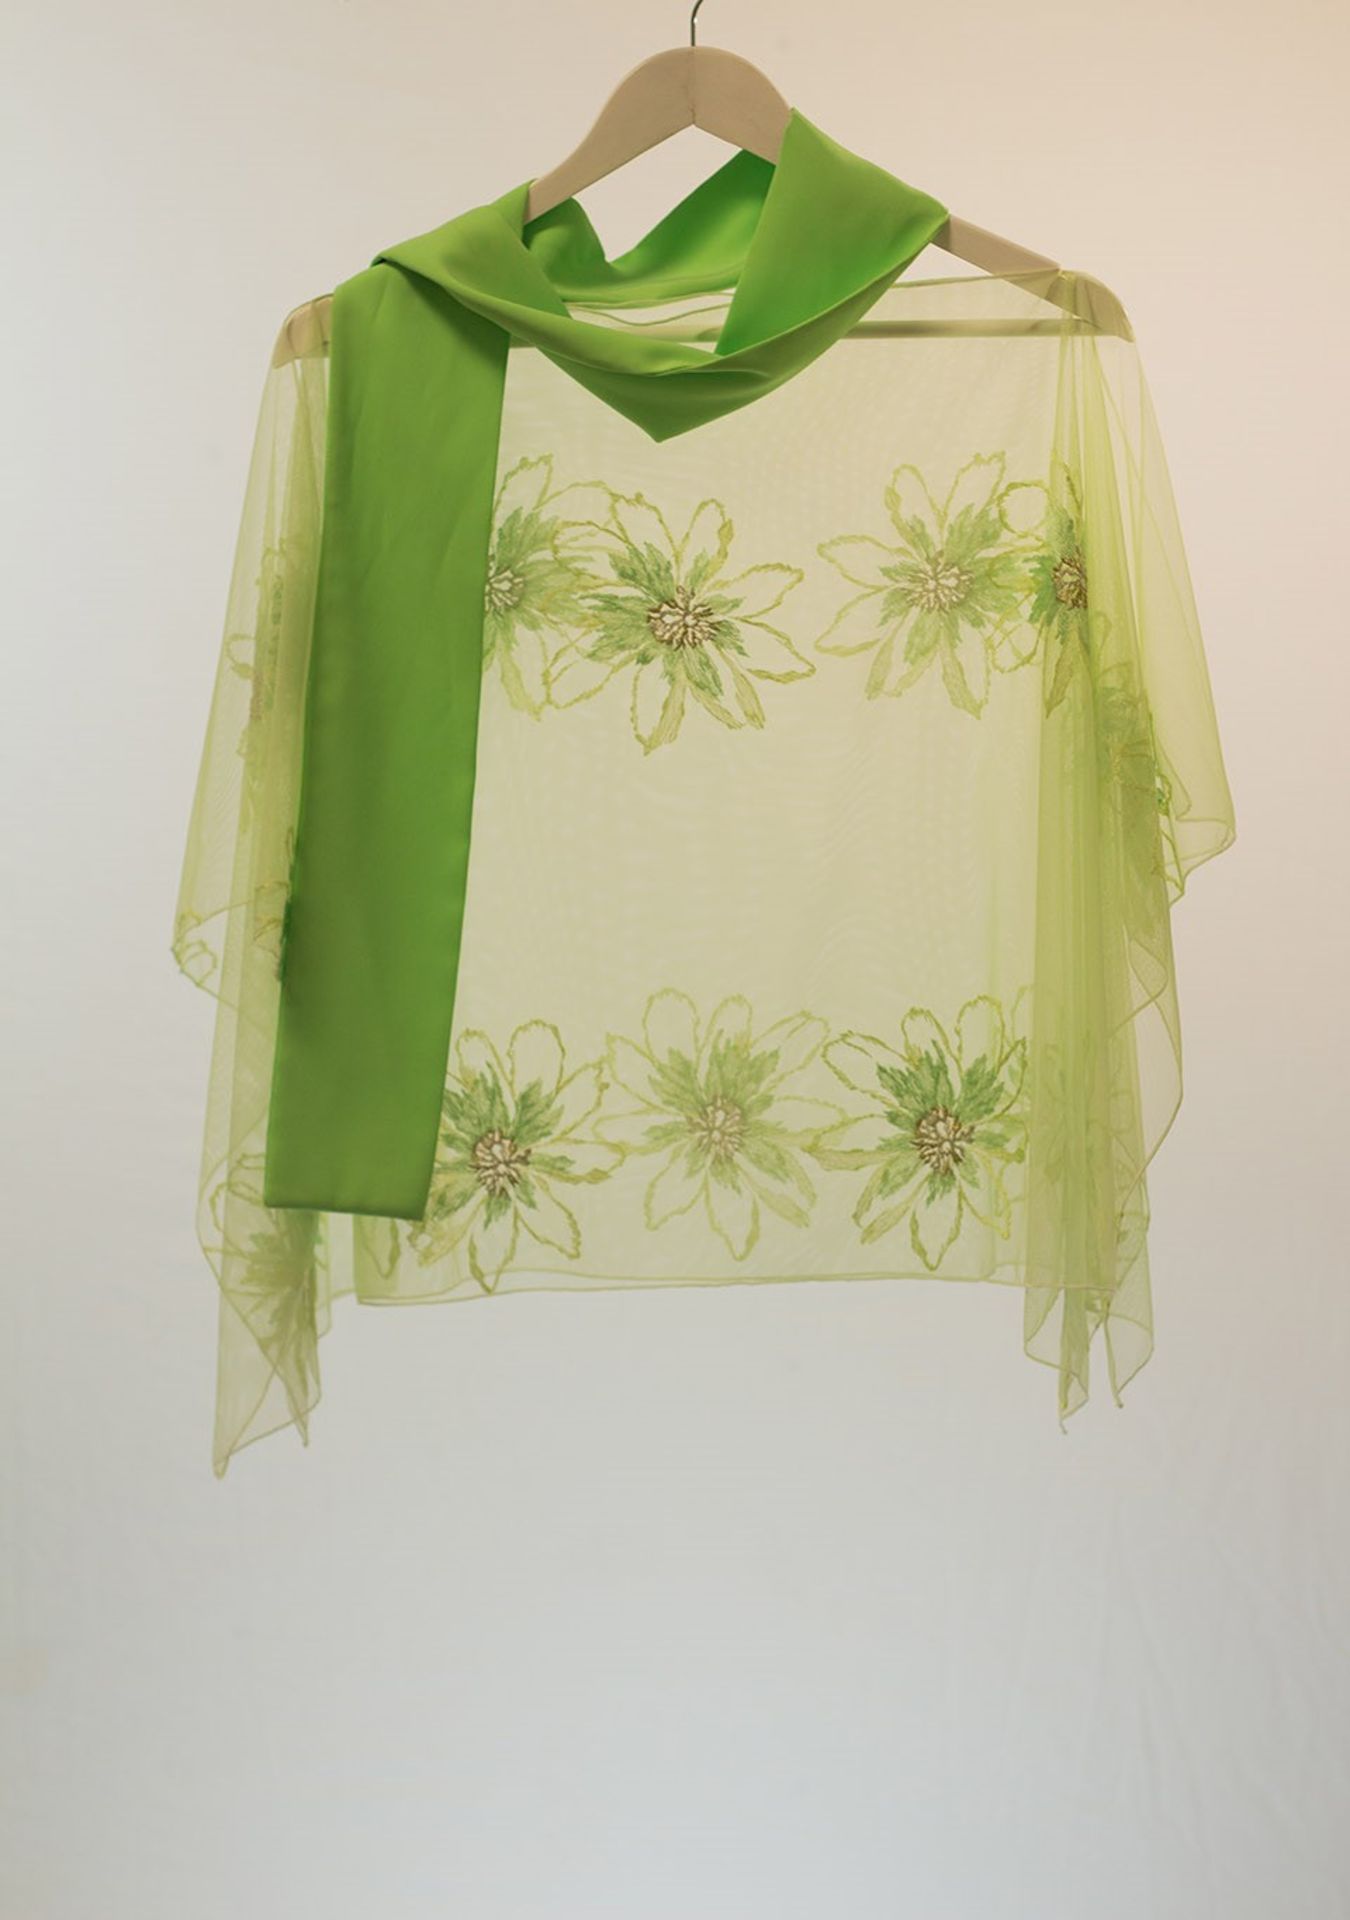 1 x Boutique Le Duc Green Skirt With Matching Scarf And Shawl - Size: 8 - Material: 100% Silk - From - Image 9 of 10